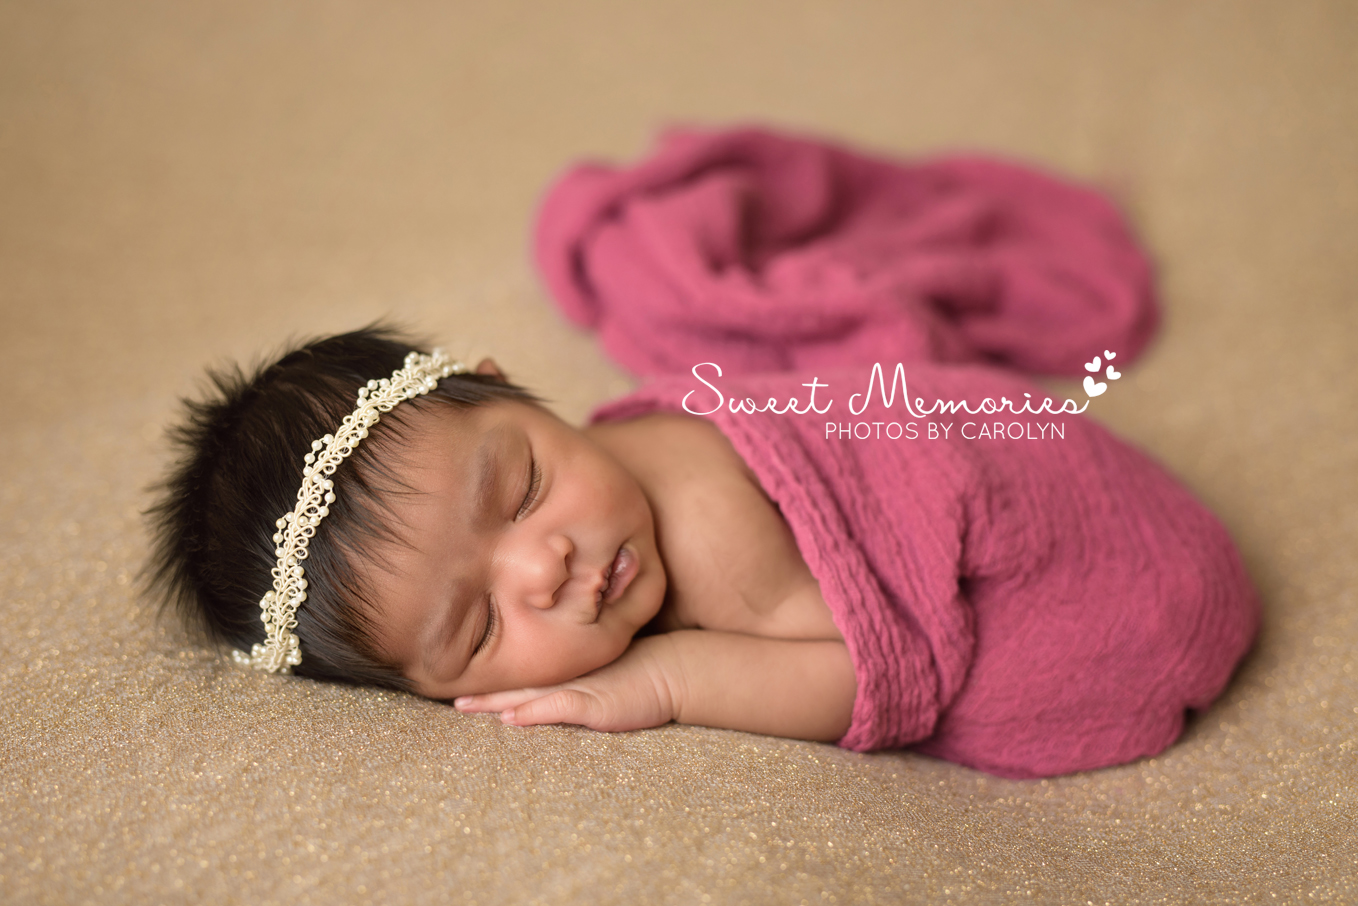 Sweet Memories Photos by Carolyn | Newtown PA | Bucks County Montgomery County Newborn Infant Baby Photographer | Indian newborn baby girl | gold and pink